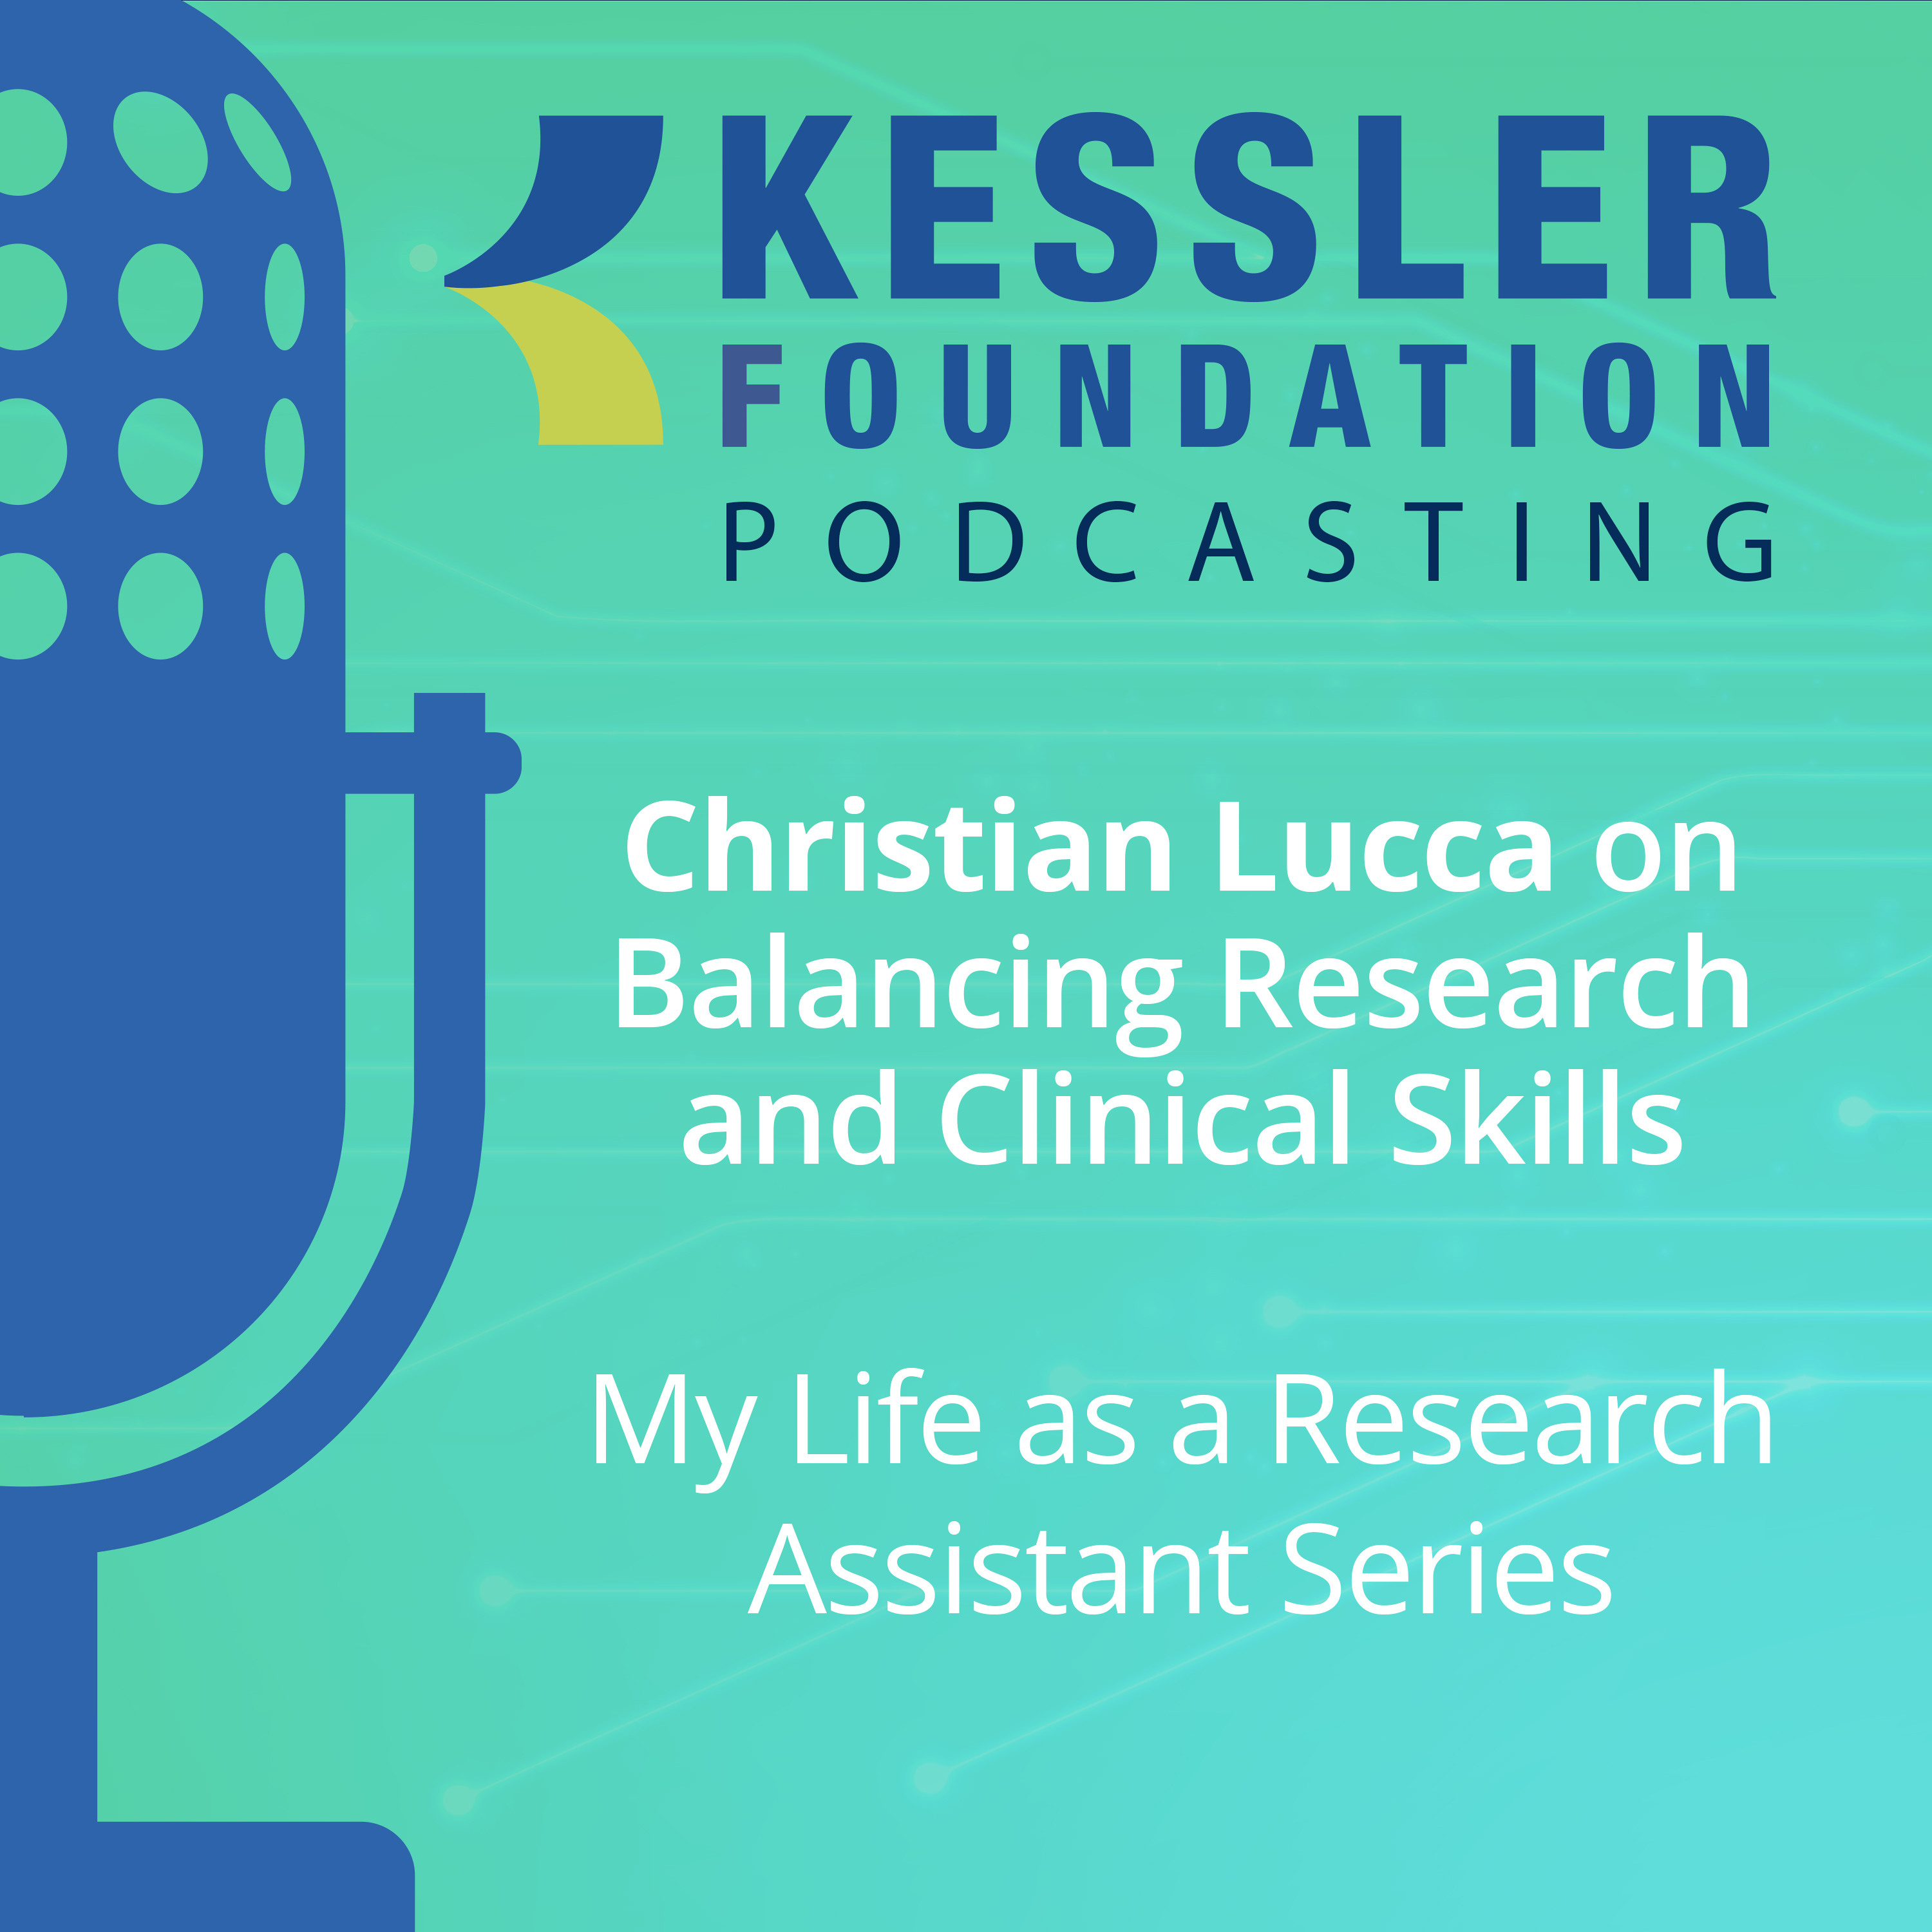 Christian Lucca on Balancing Research and Clinical Skills